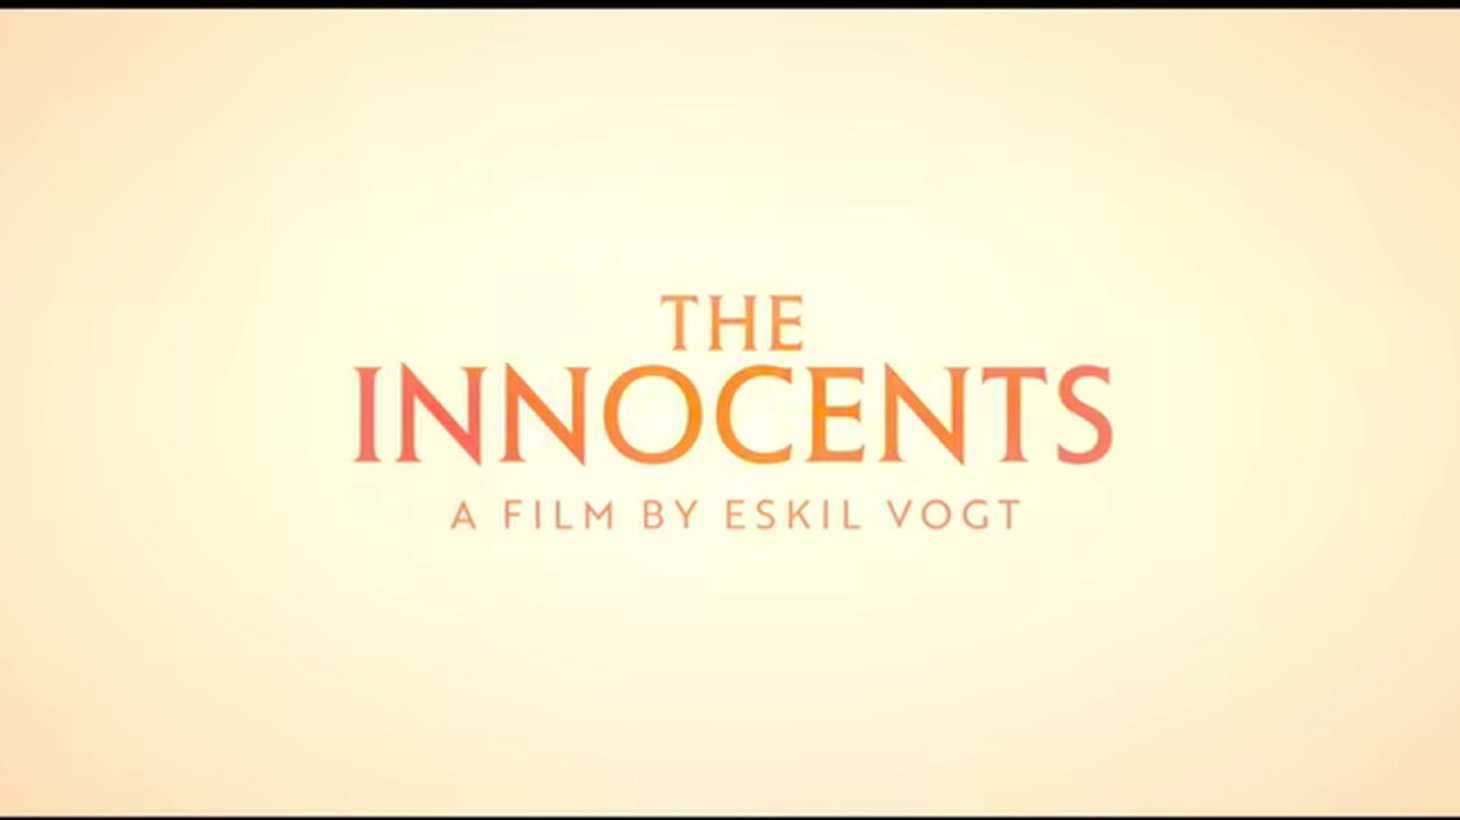 “The Innocents” is an eerie Norwegian film about a group of children with mysterious powers.